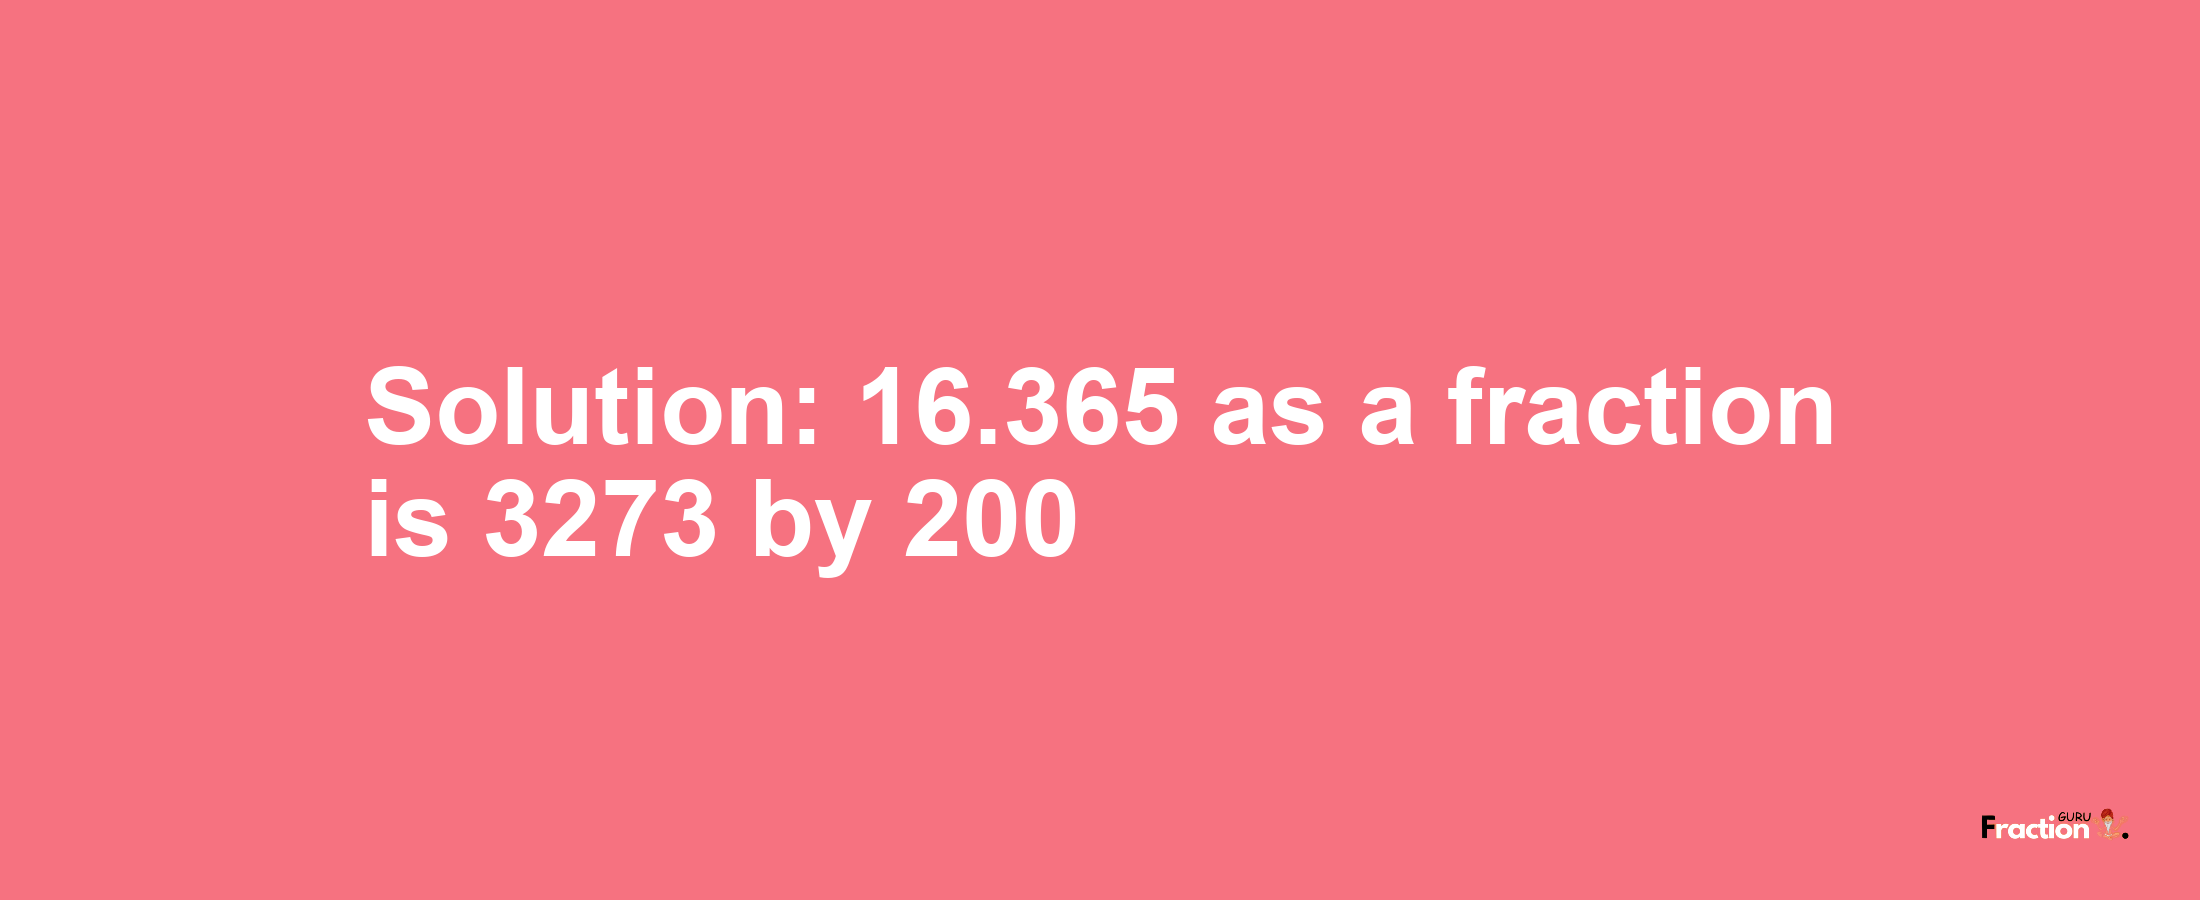 Solution:16.365 as a fraction is 3273/200